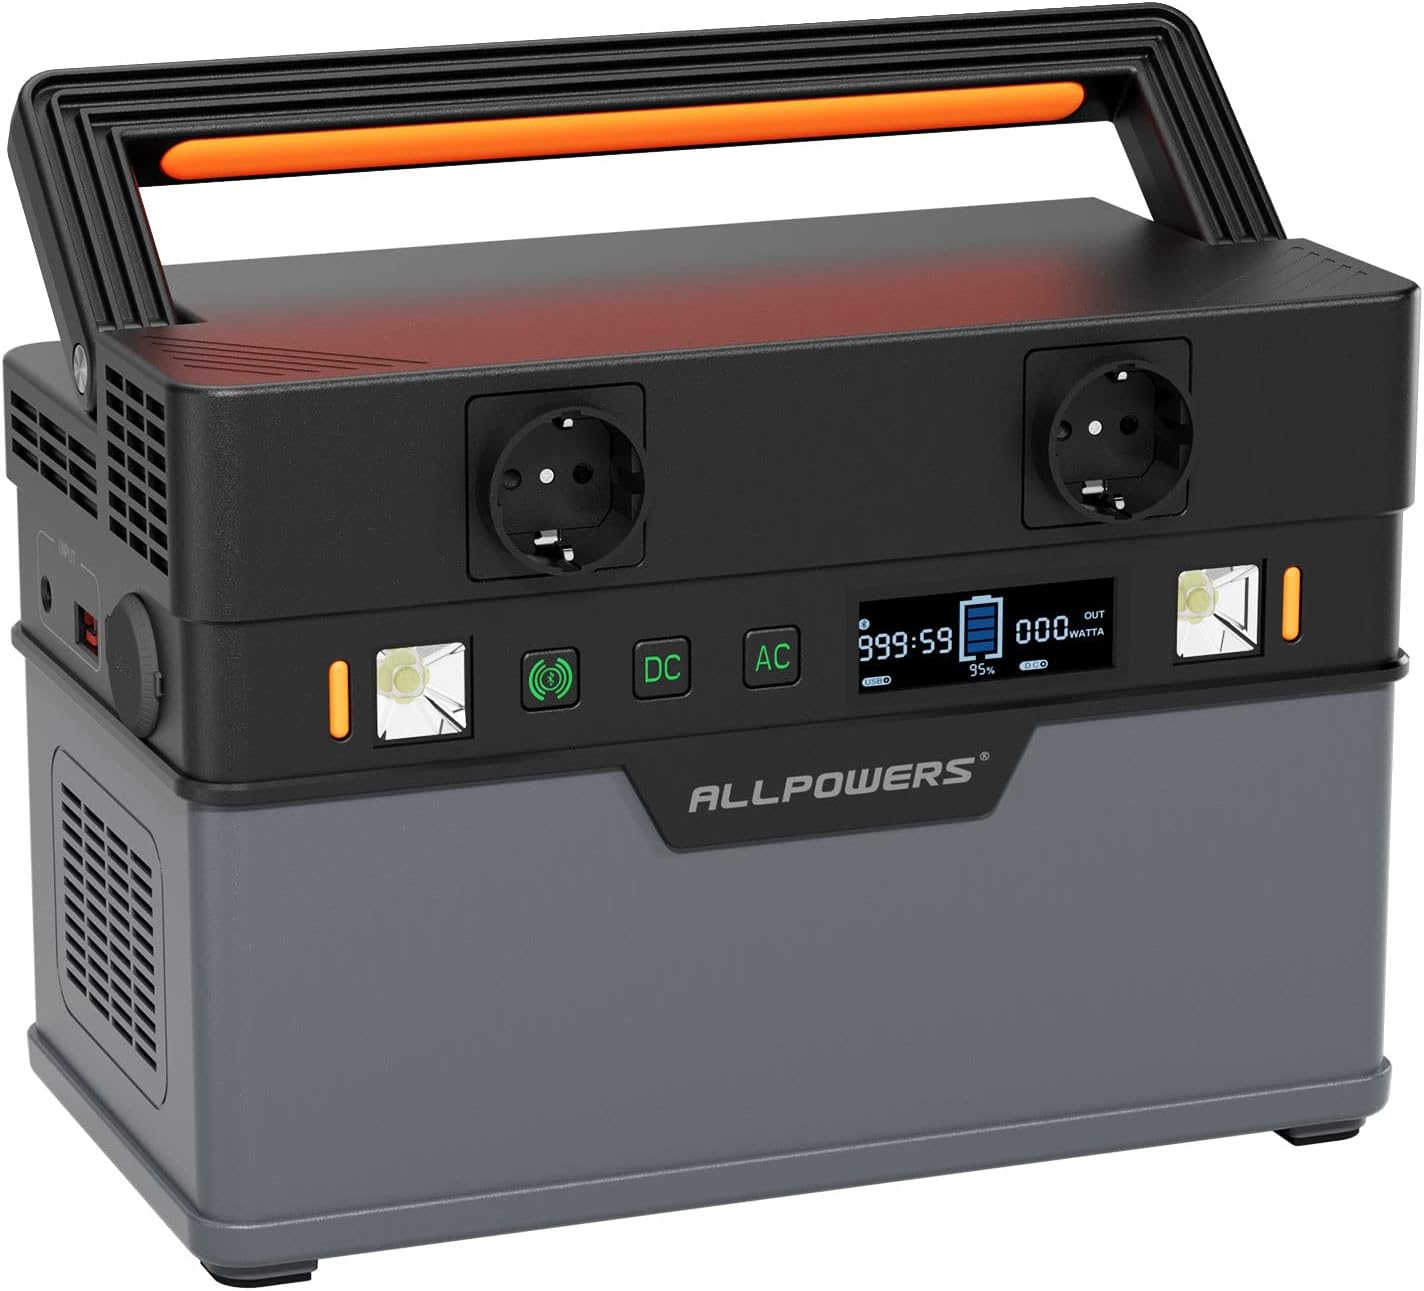 ALLPOWERS Portable Power Station 606Wh 164000mAh, 700W High Performance Battery Solar Generator, Battery Mobile Power Storage for Outdoor Garden Party Travel Camping Motorhome Emergency Power Station